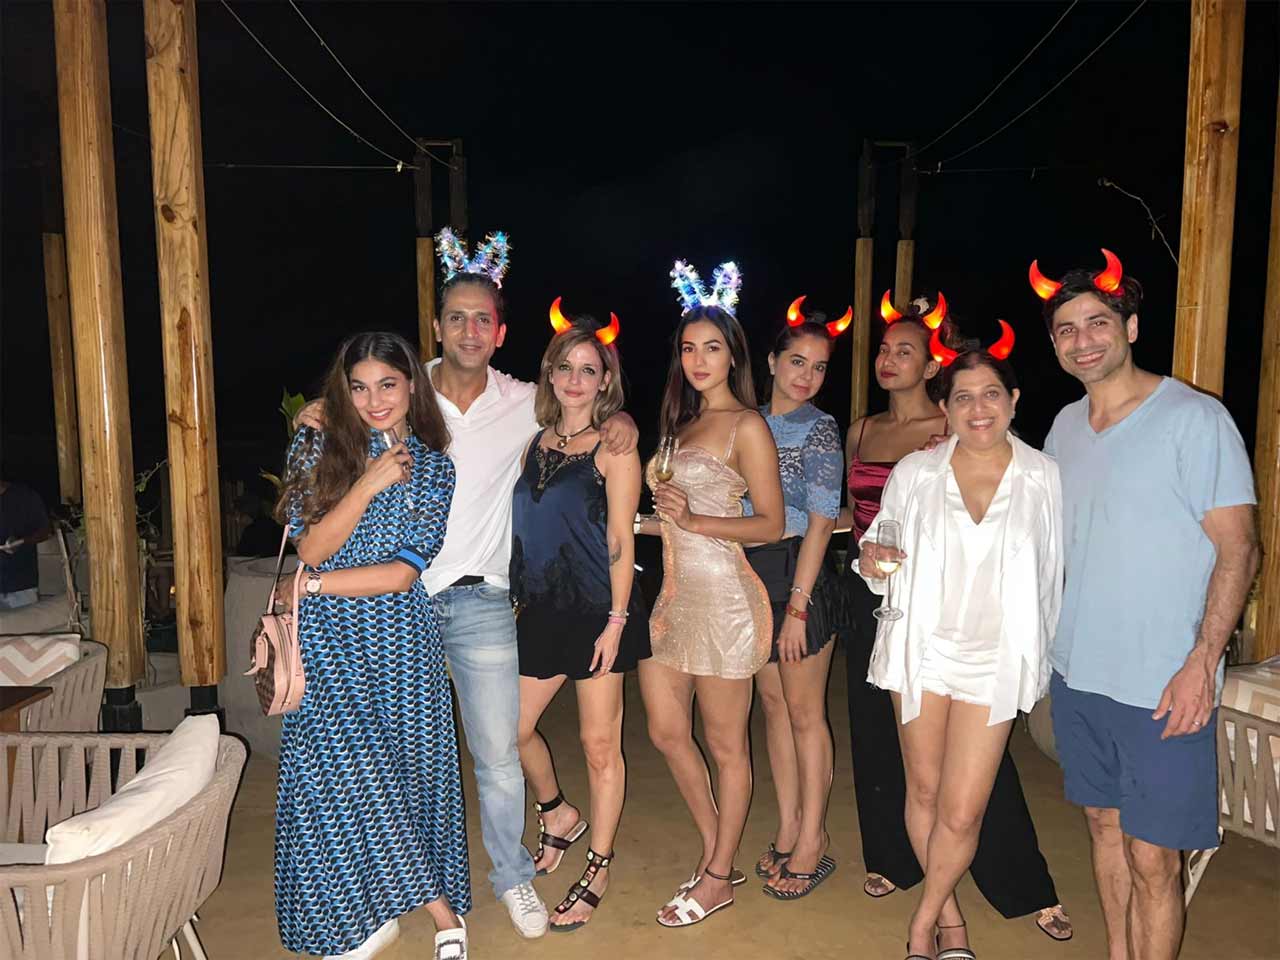 Here's a look at some inside pictures from the Adipurush actress's birthday celebrations in Goa!